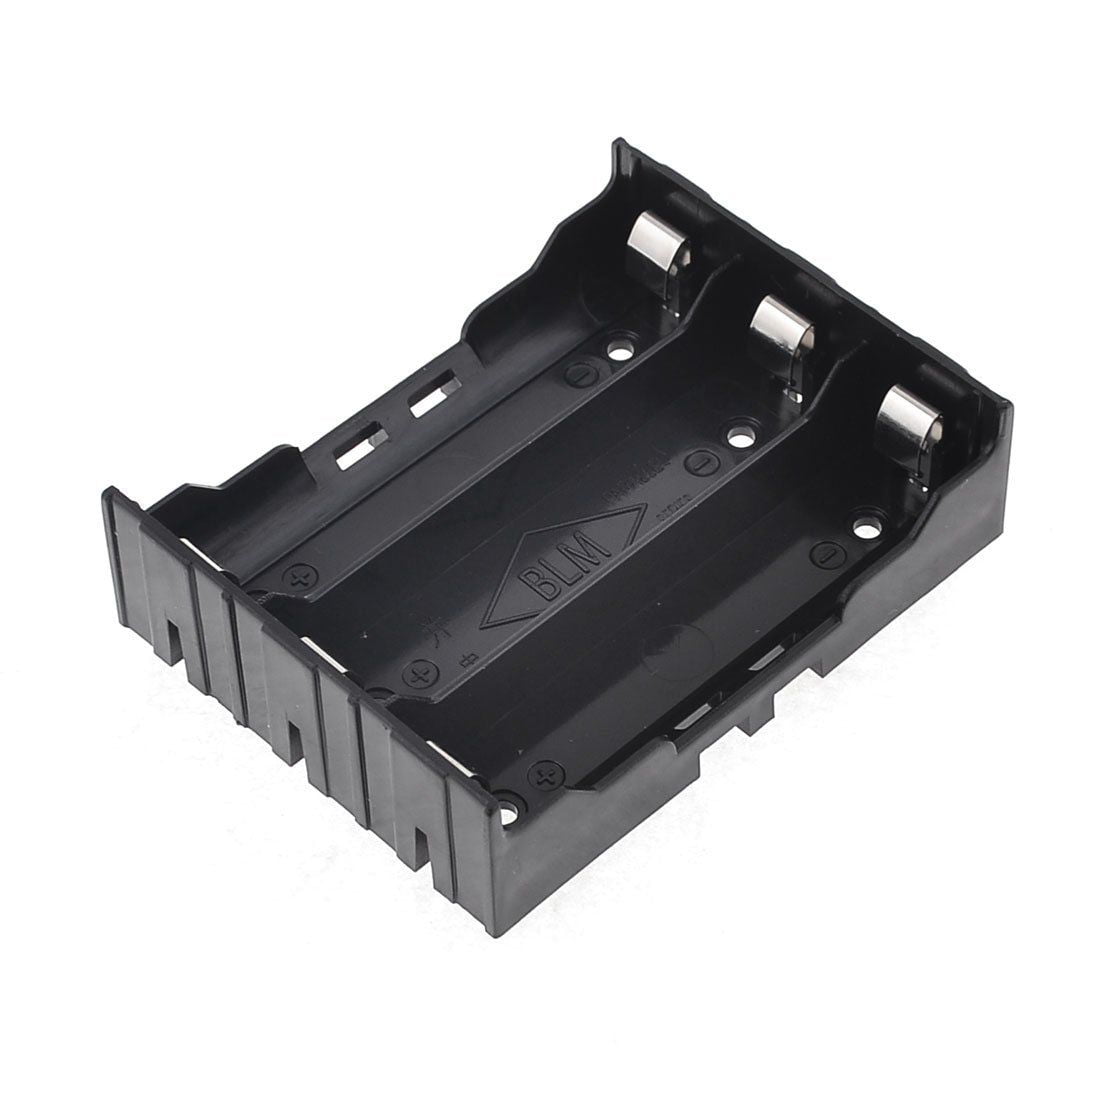 3 Cell 18650 Plastic Battery Holder with Pins Case PCB Board Box Case Mount 